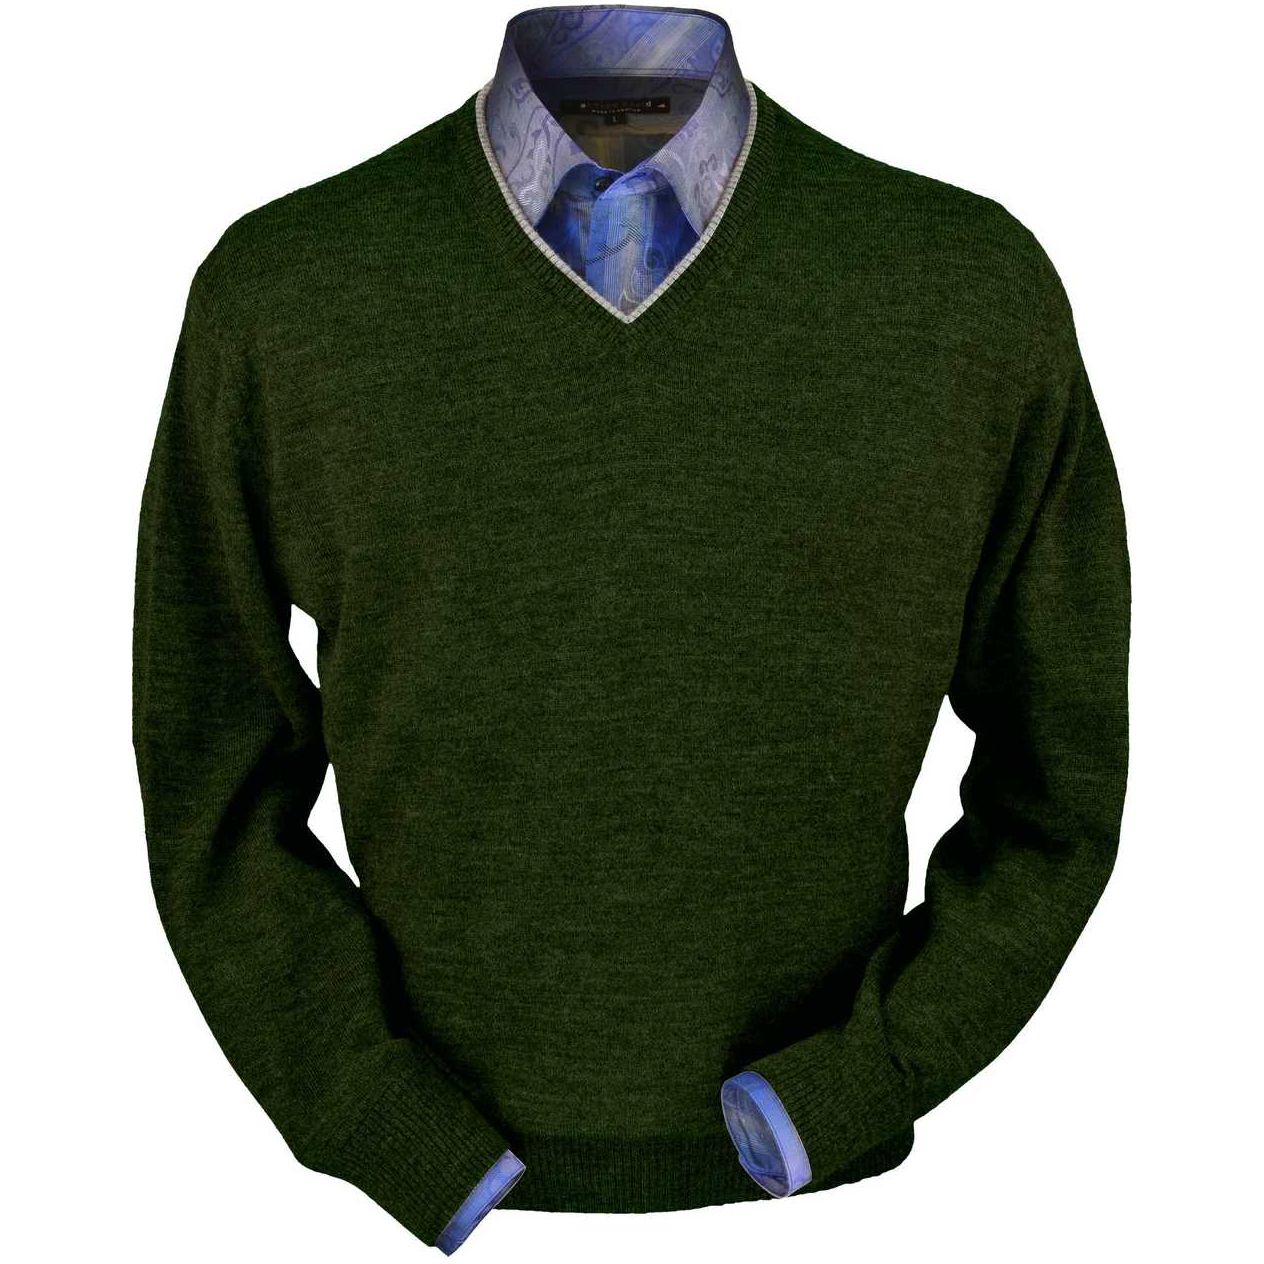 Royal Alpaca V-Neck Sweater in Hunter Green Heather by Peru Unlimited